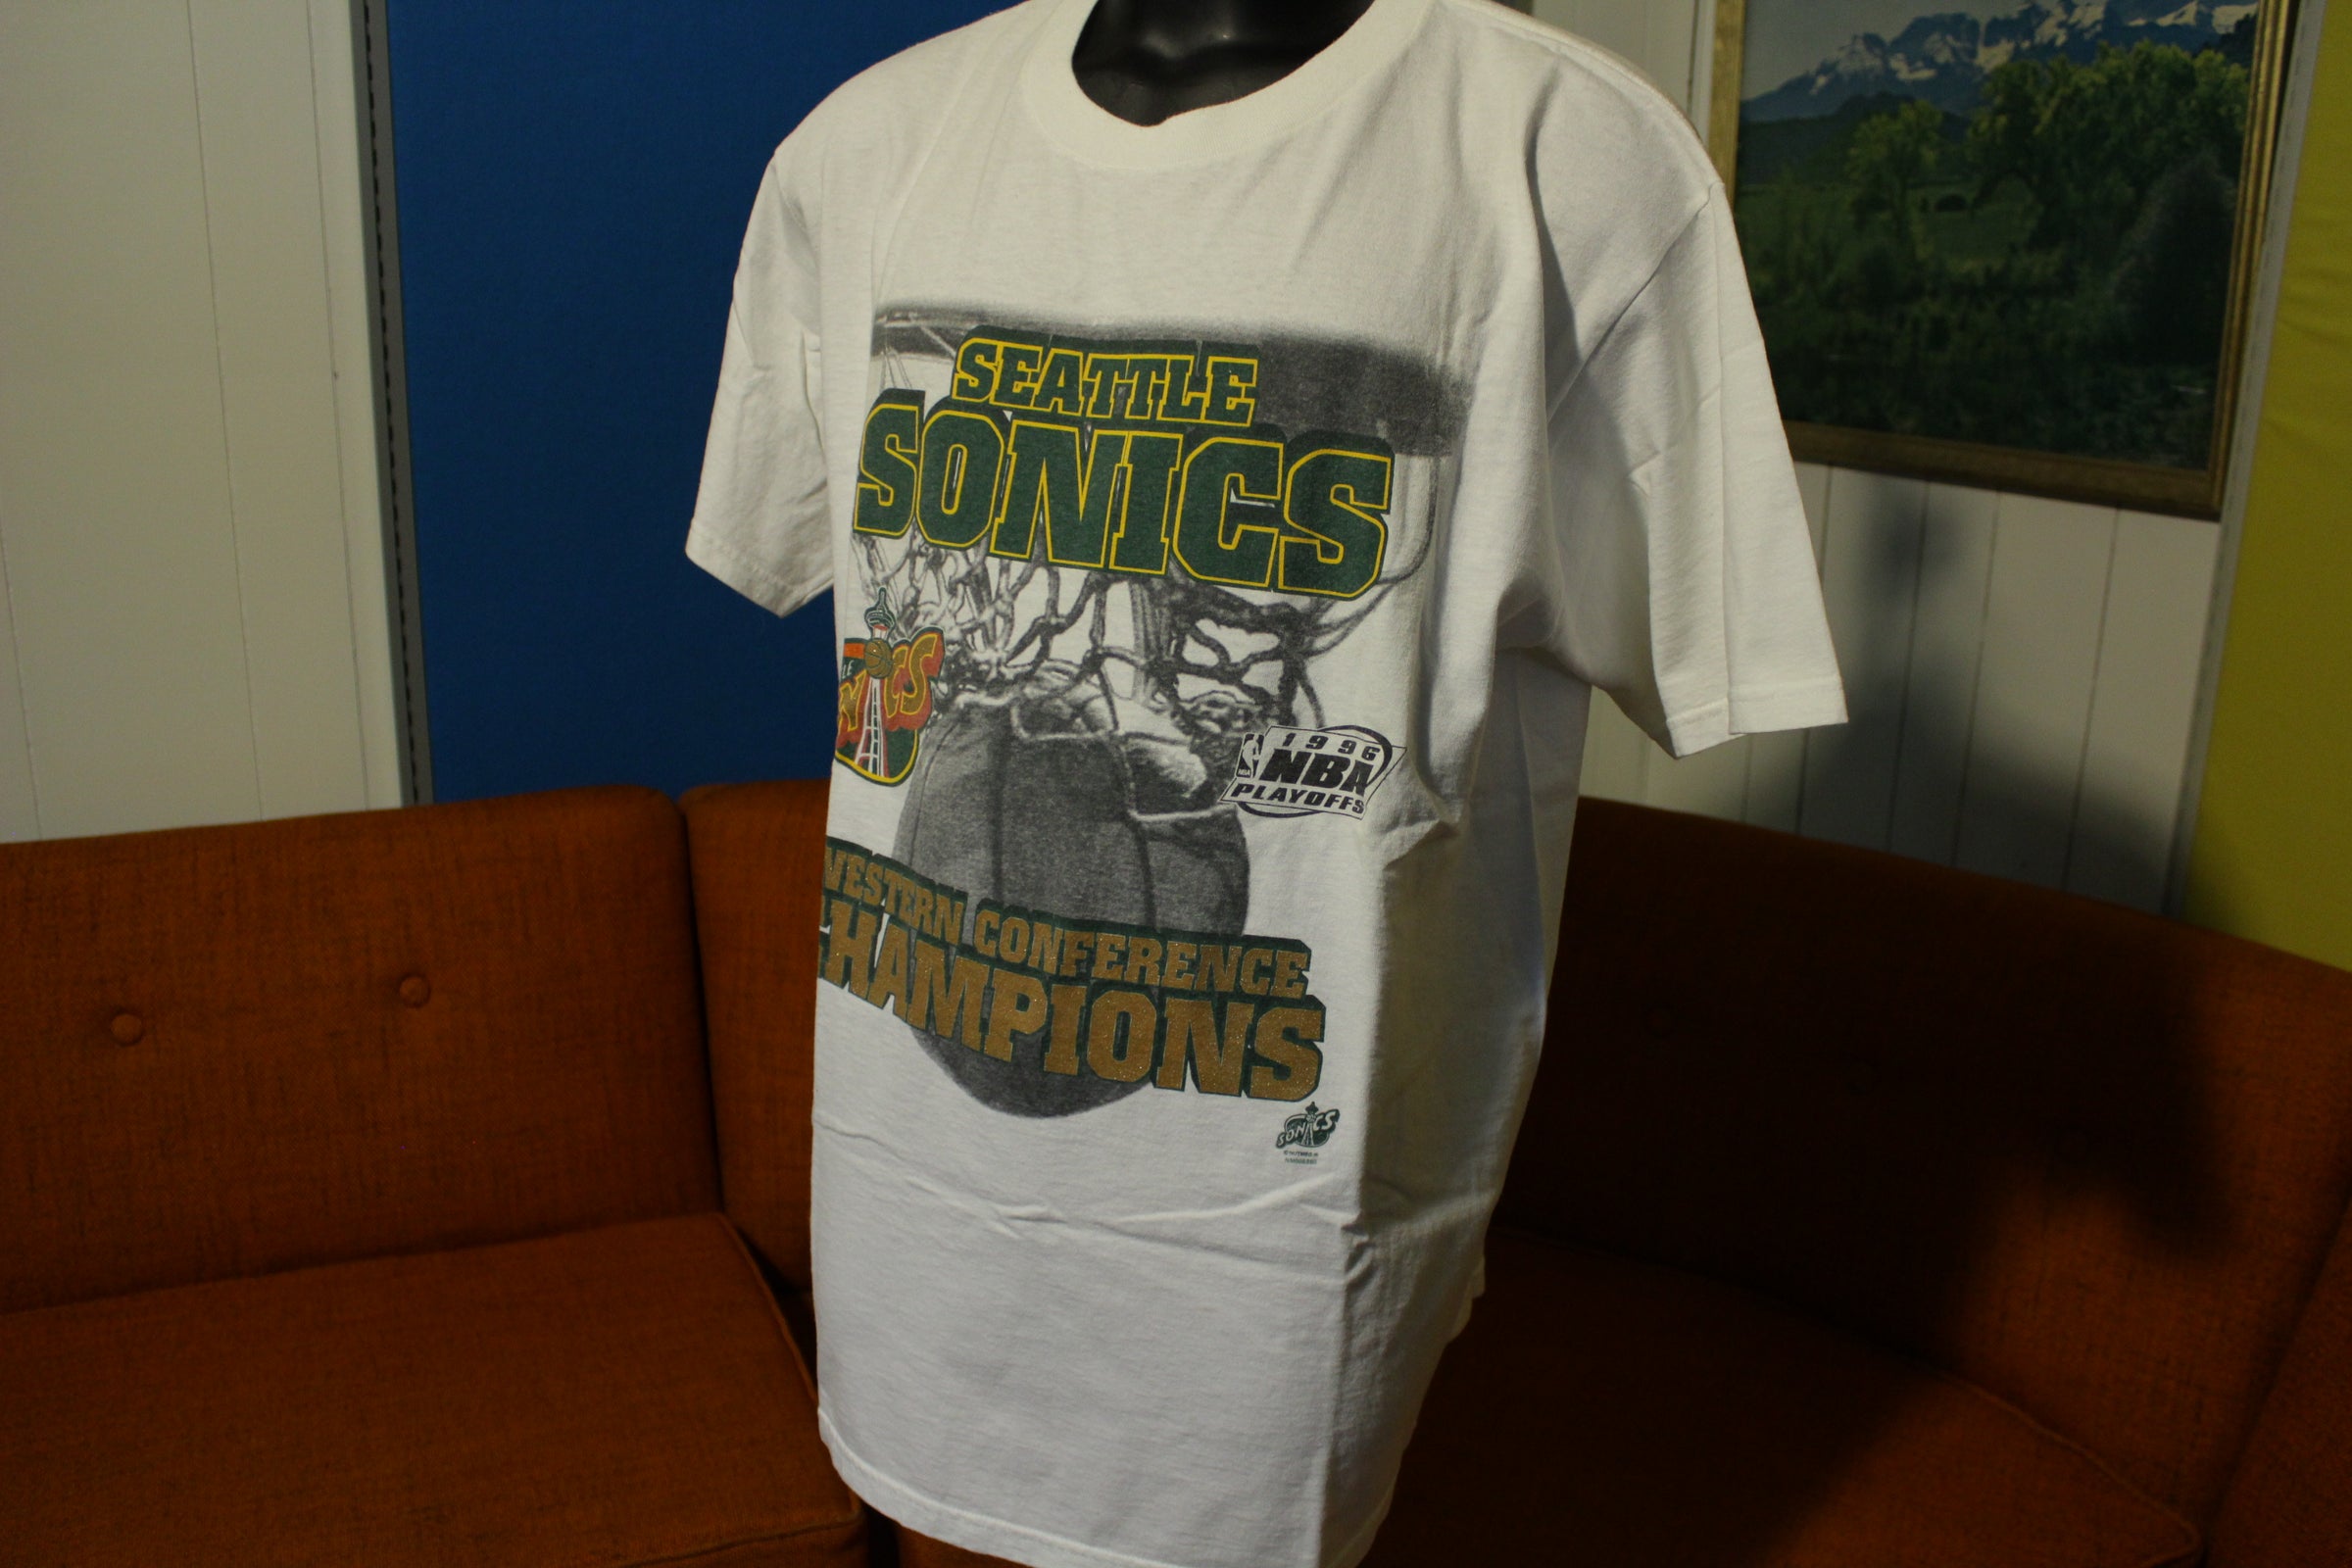 Vintage 1996 Seattle Supersonics NBA Finals T-shirt Made in